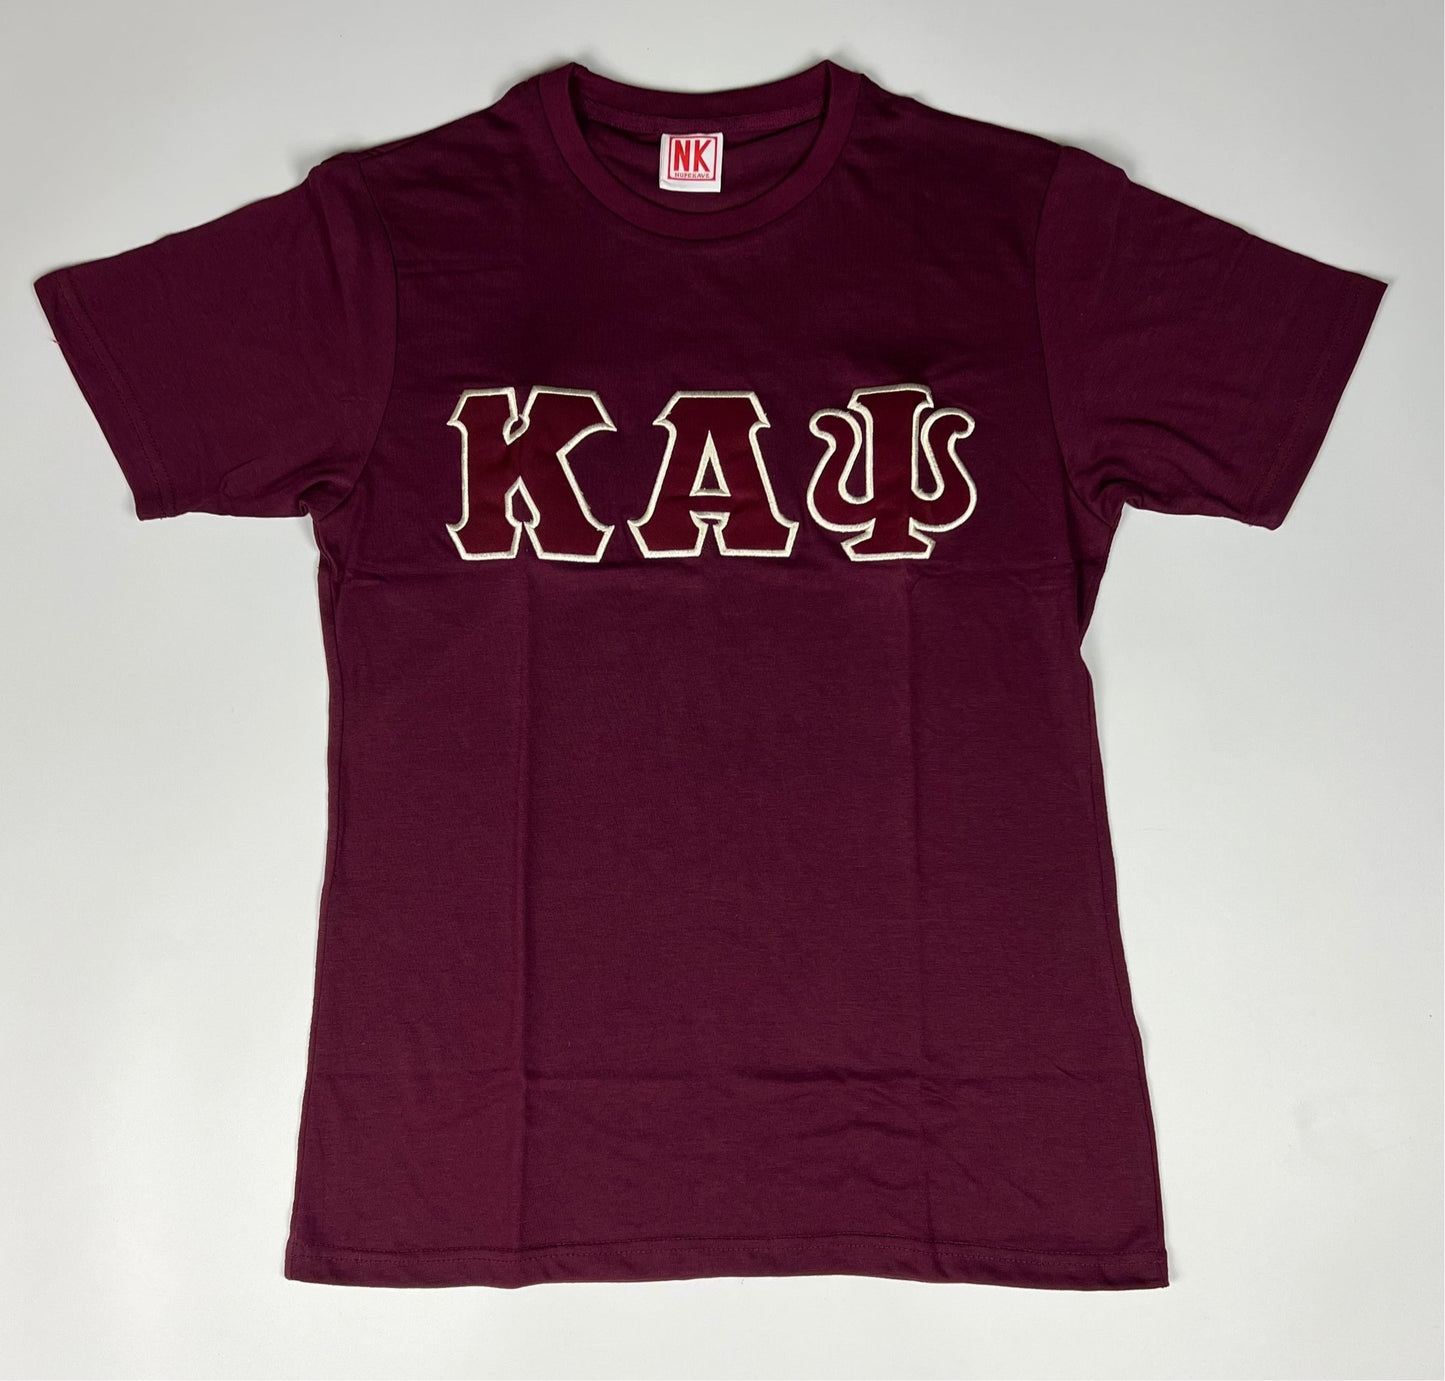 Nupe Kave Exclusive Kappa Alpha Psi Double Stitched Appliqué Embroidery Lettered T-shirt . This is the perfect short-sleeved shirt to wear while showing off your Kappa Alpha Psi fraternity lettering. A comfortable 100% cotton tee with a twill Greek letters embroidery across the chest give you the perfect fit. This shirt is also a perfect gift for your favorite Kappa Man.